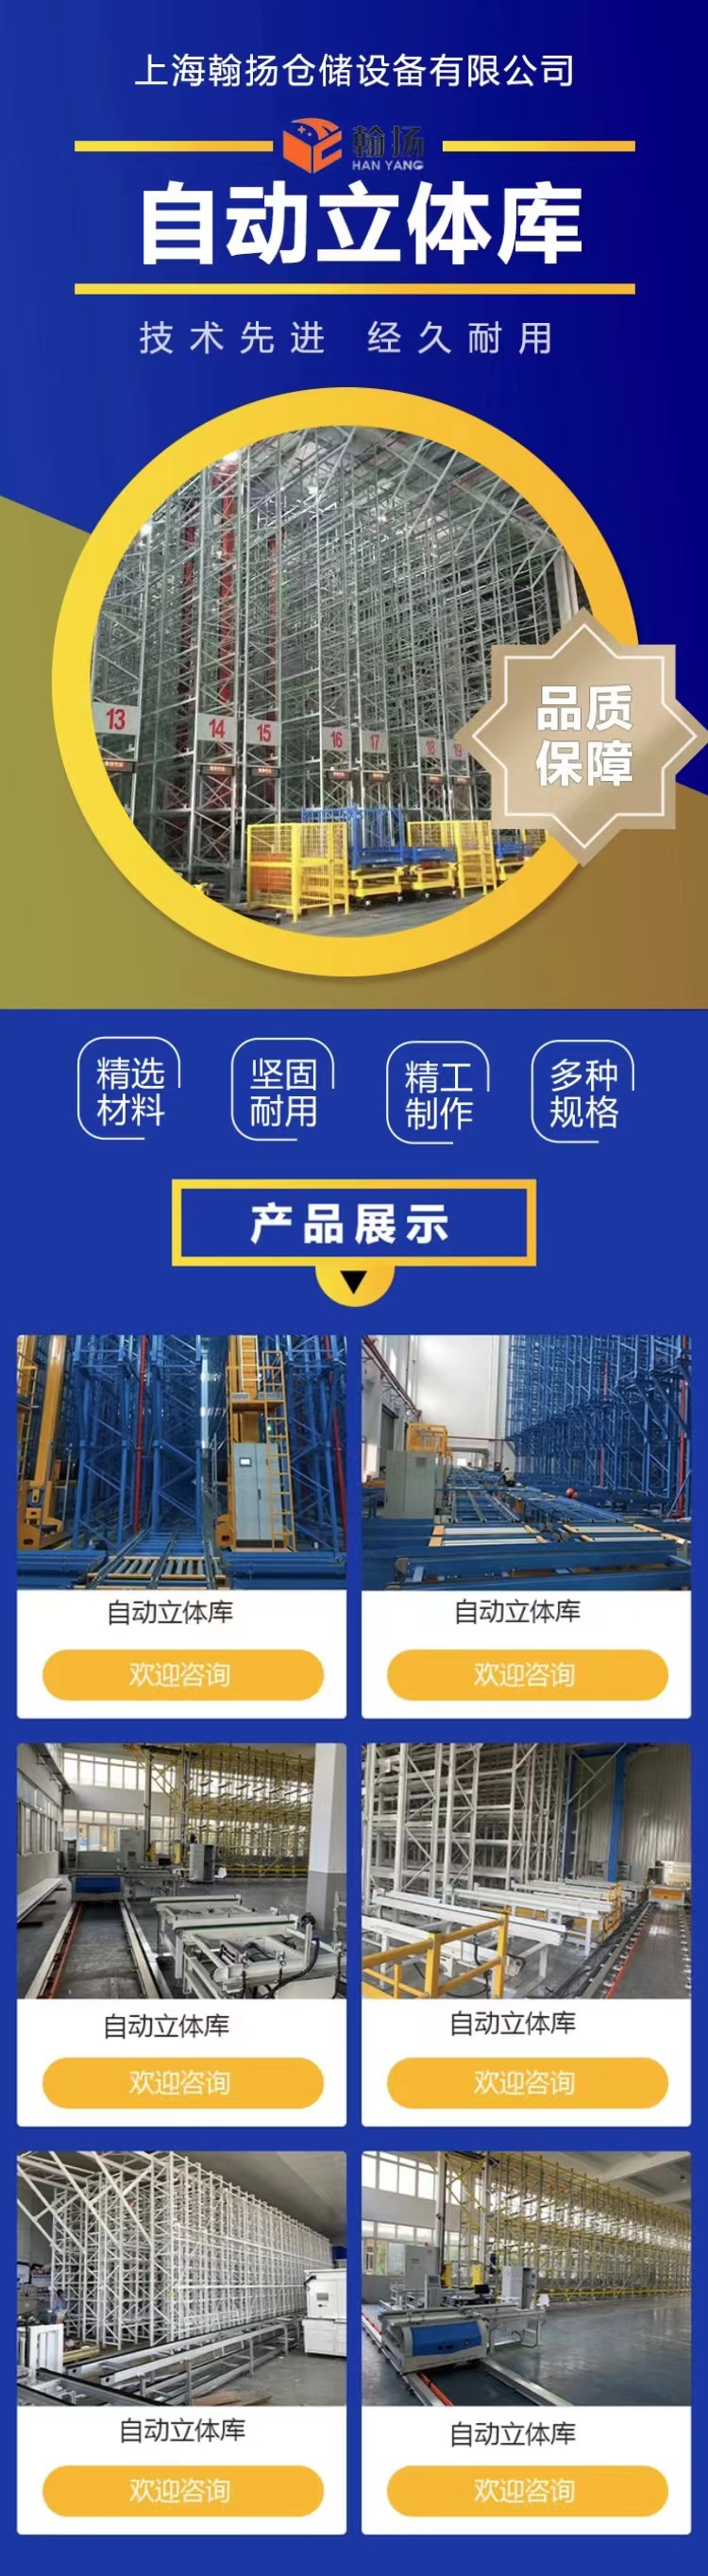 Elevated large industrial four-way vehicle three-dimensional warehouse manufacturers supply intelligent logistics warehousing management system